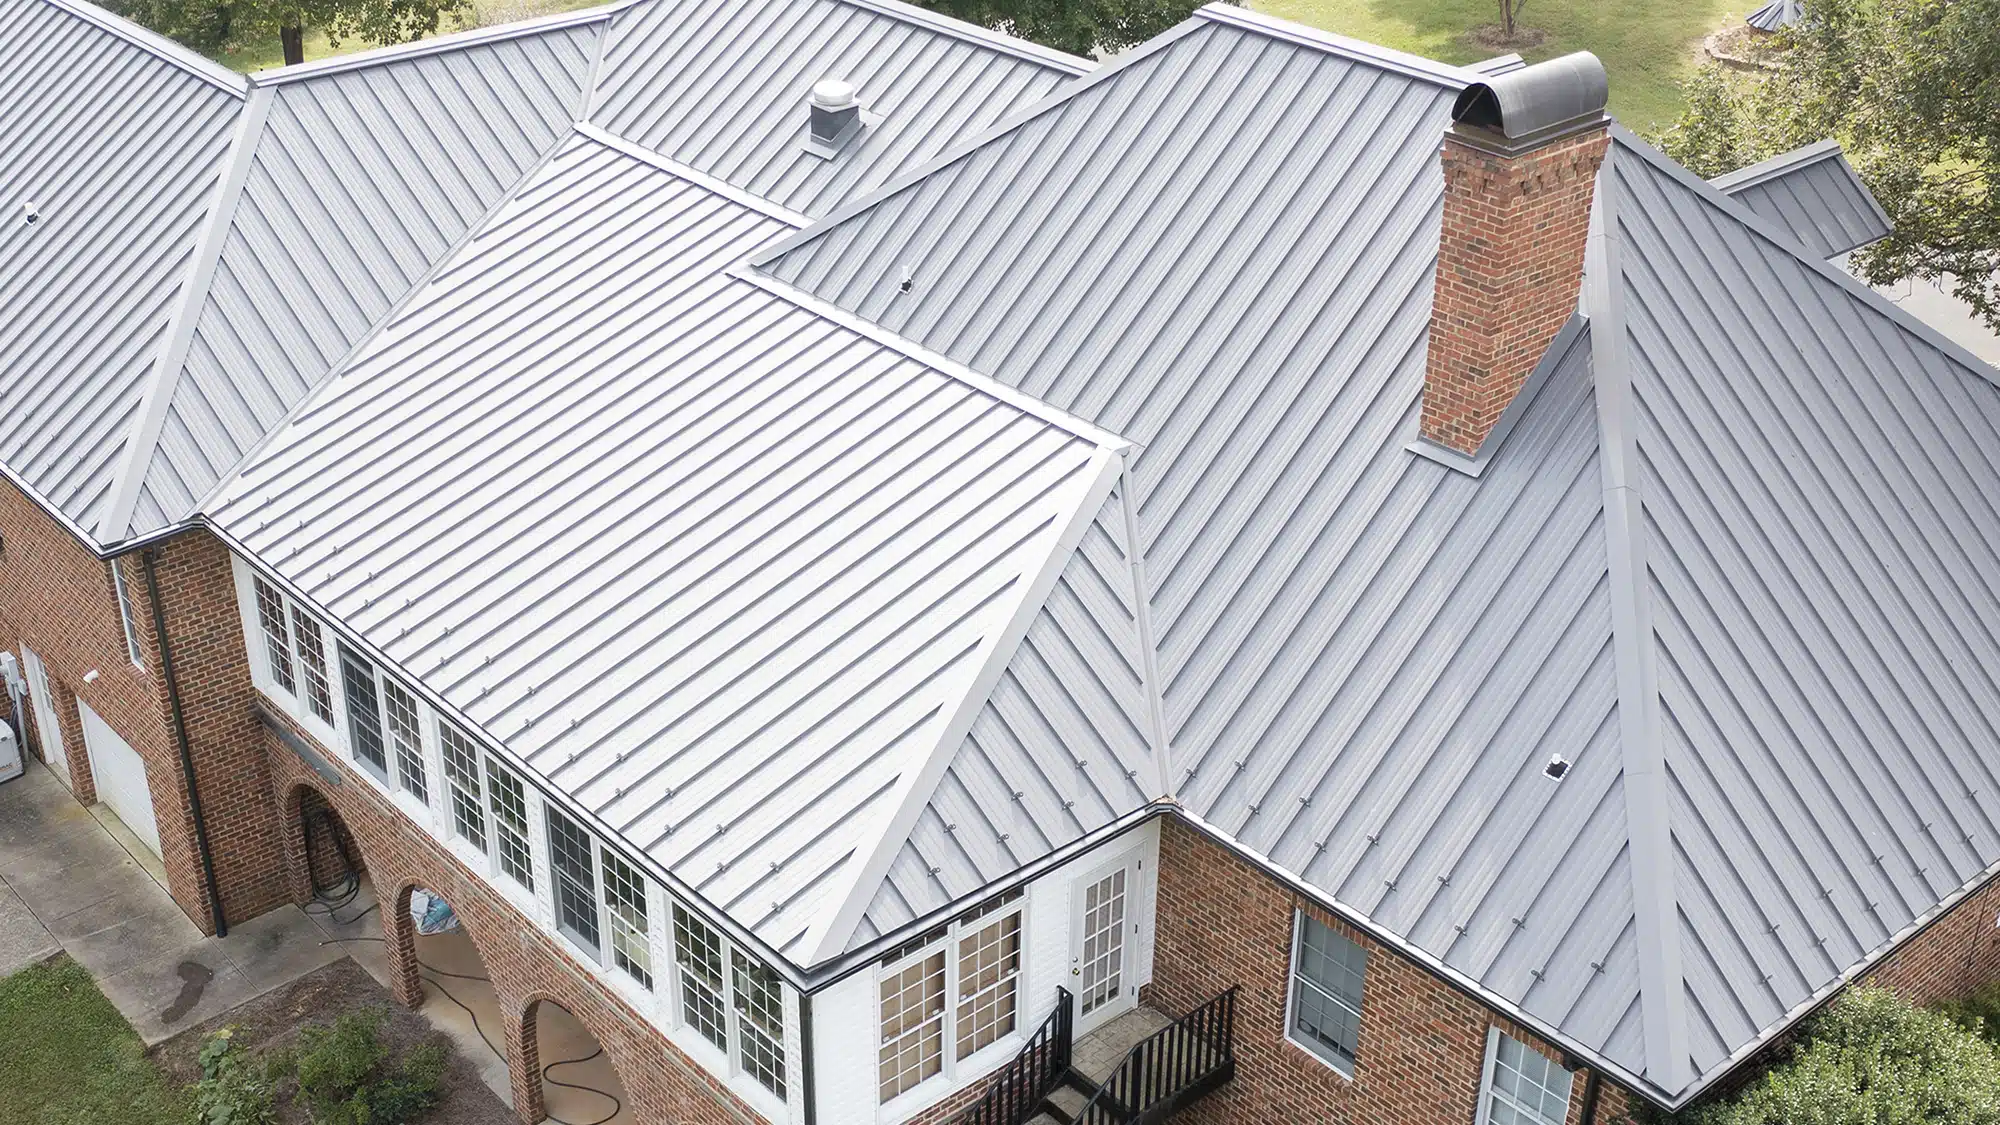 Central Snap Smoke Roof on a Residential Home